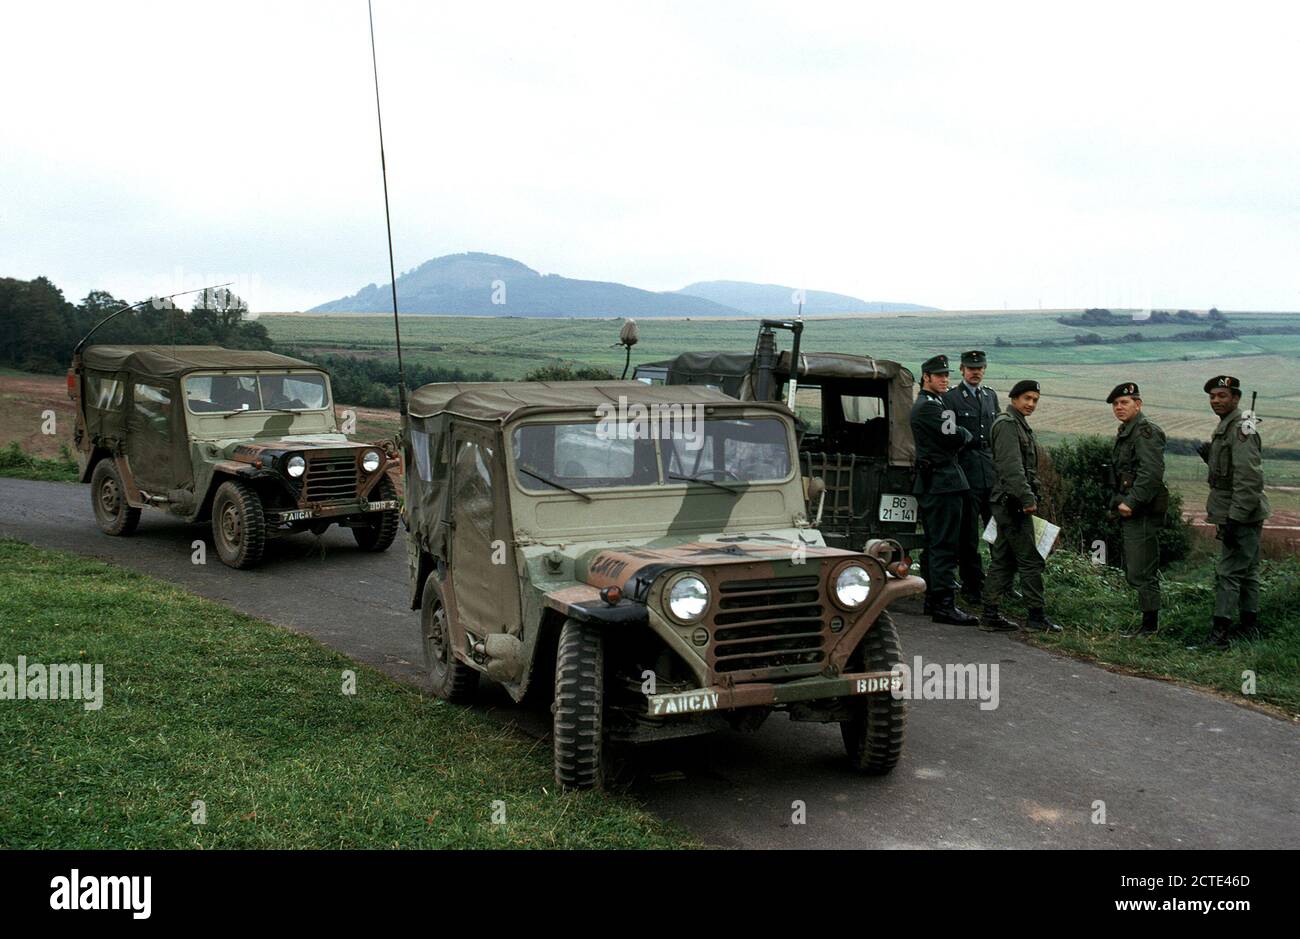 1979 - Members of the 11th Armored Cavalry stop to talk with West German soldiers while patrolling the border between East and West Germany in M151 light vehicles. Stock Photo